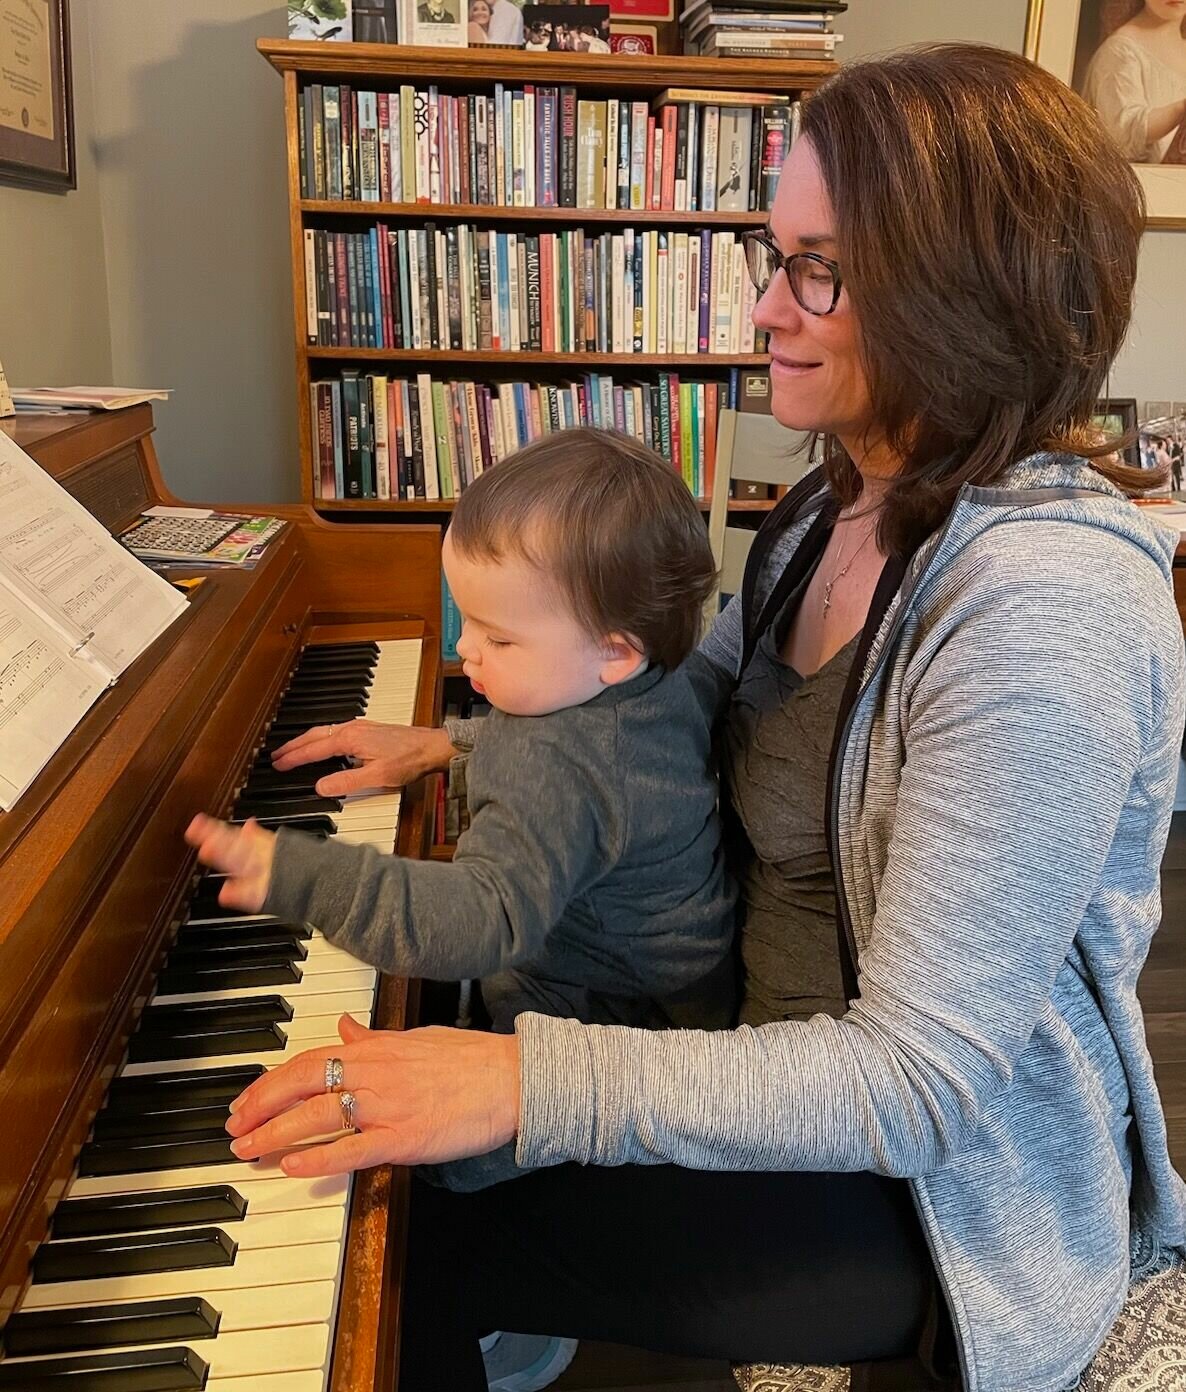 Teaching the next generation the wonder of music no matter the age. Kirk is pictured here with her grandson as he plays on the piano.